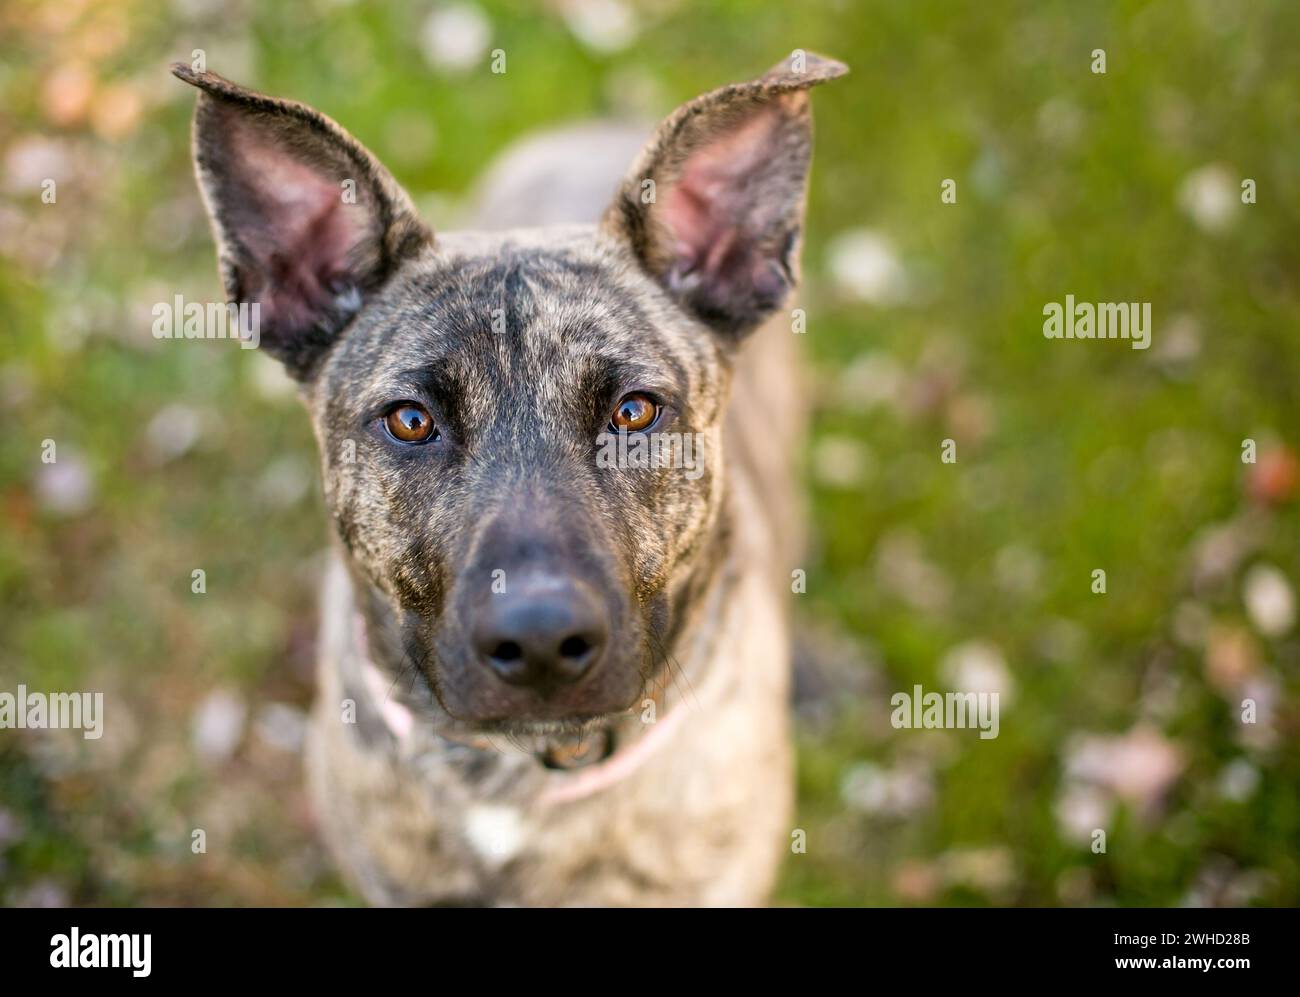 A Dutch Shepherd mixed breed dog with large ears looking up at the camera Stock Photo